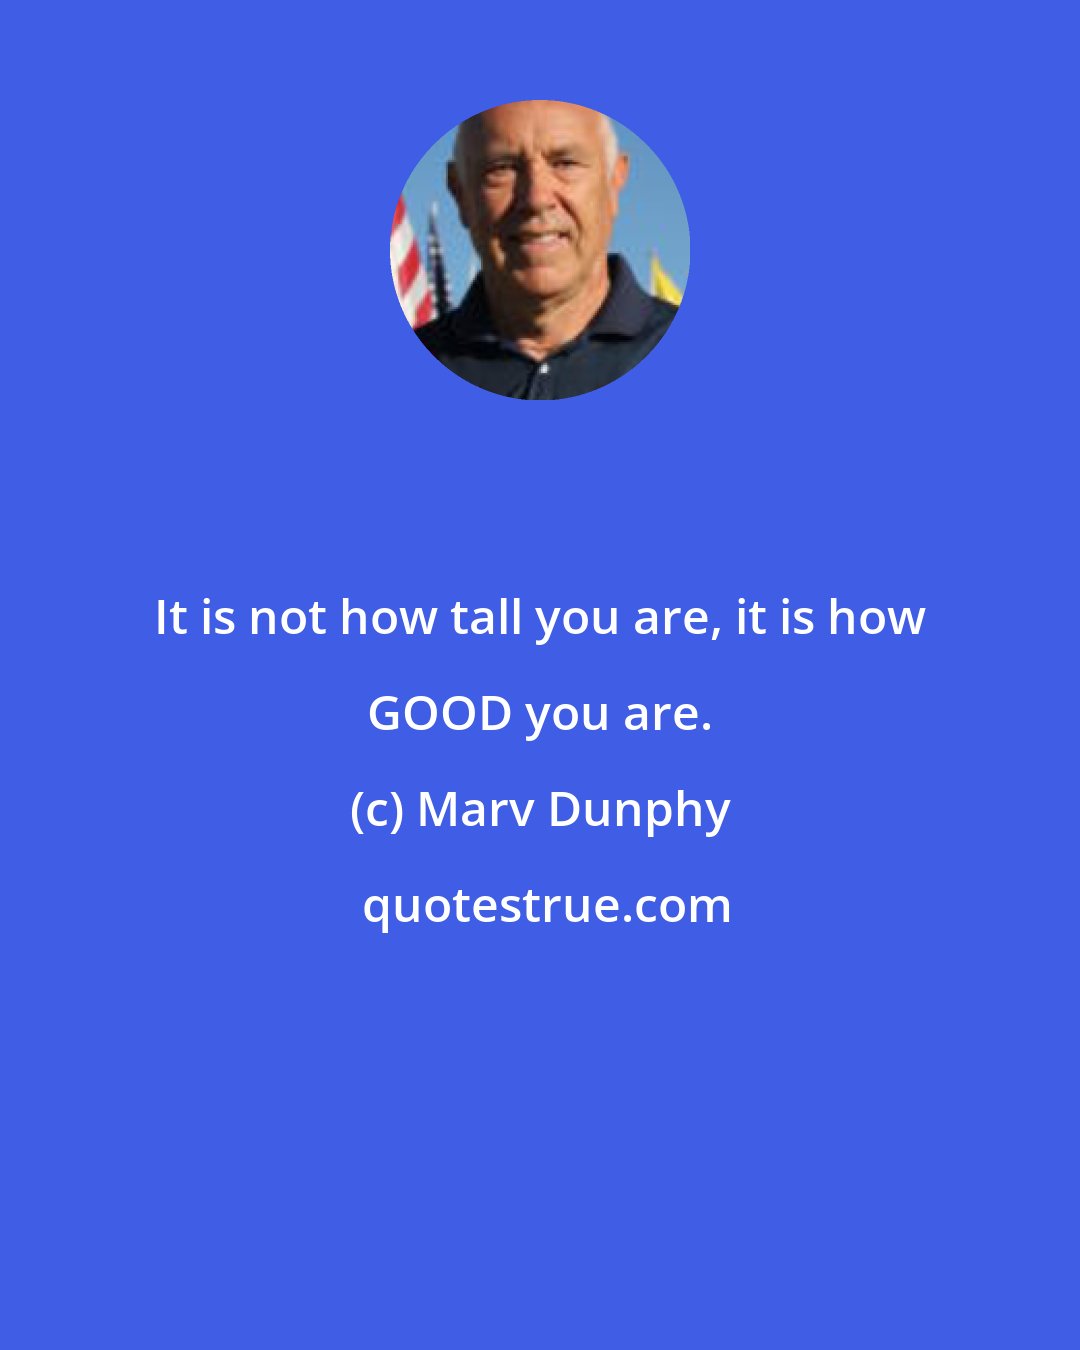 Marv Dunphy: It is not how tall you are, it is how GOOD you are.